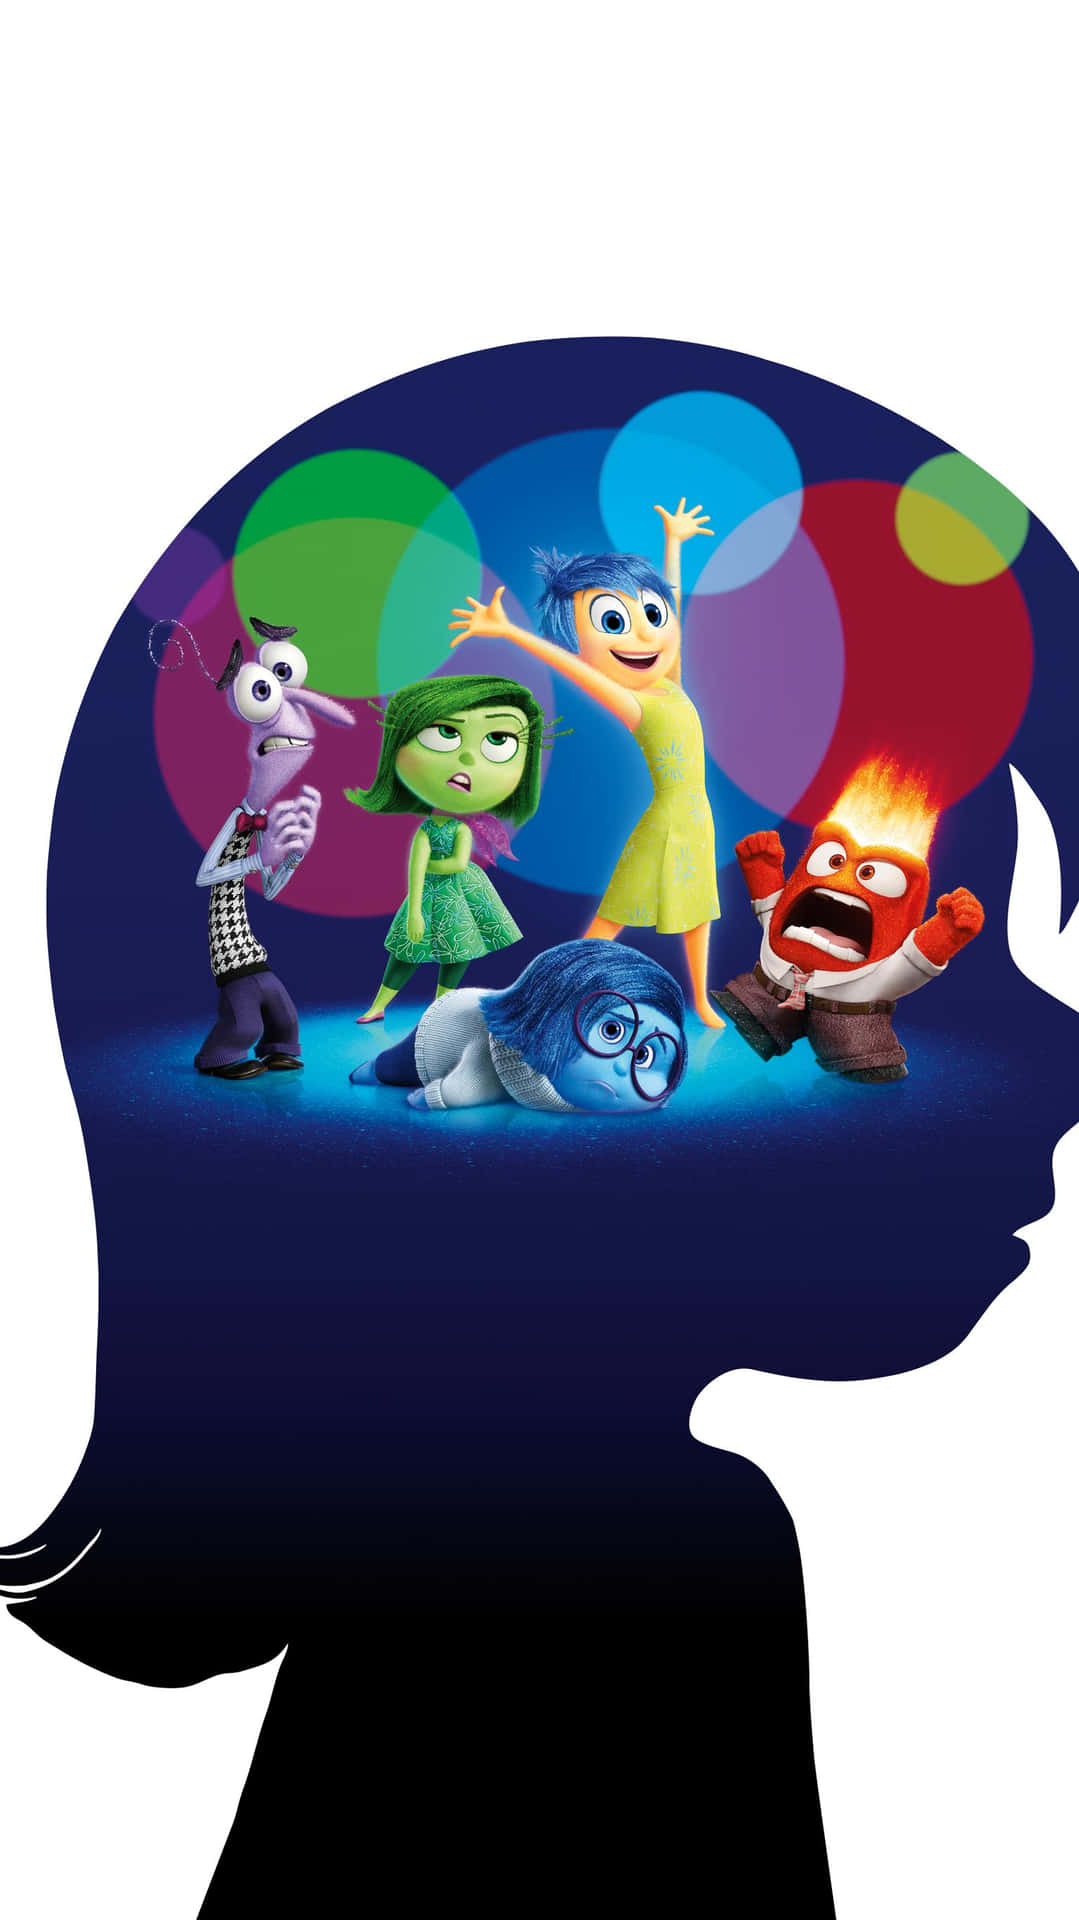 The gang from Disney Pixar's Inside Out are here to lighten up your day